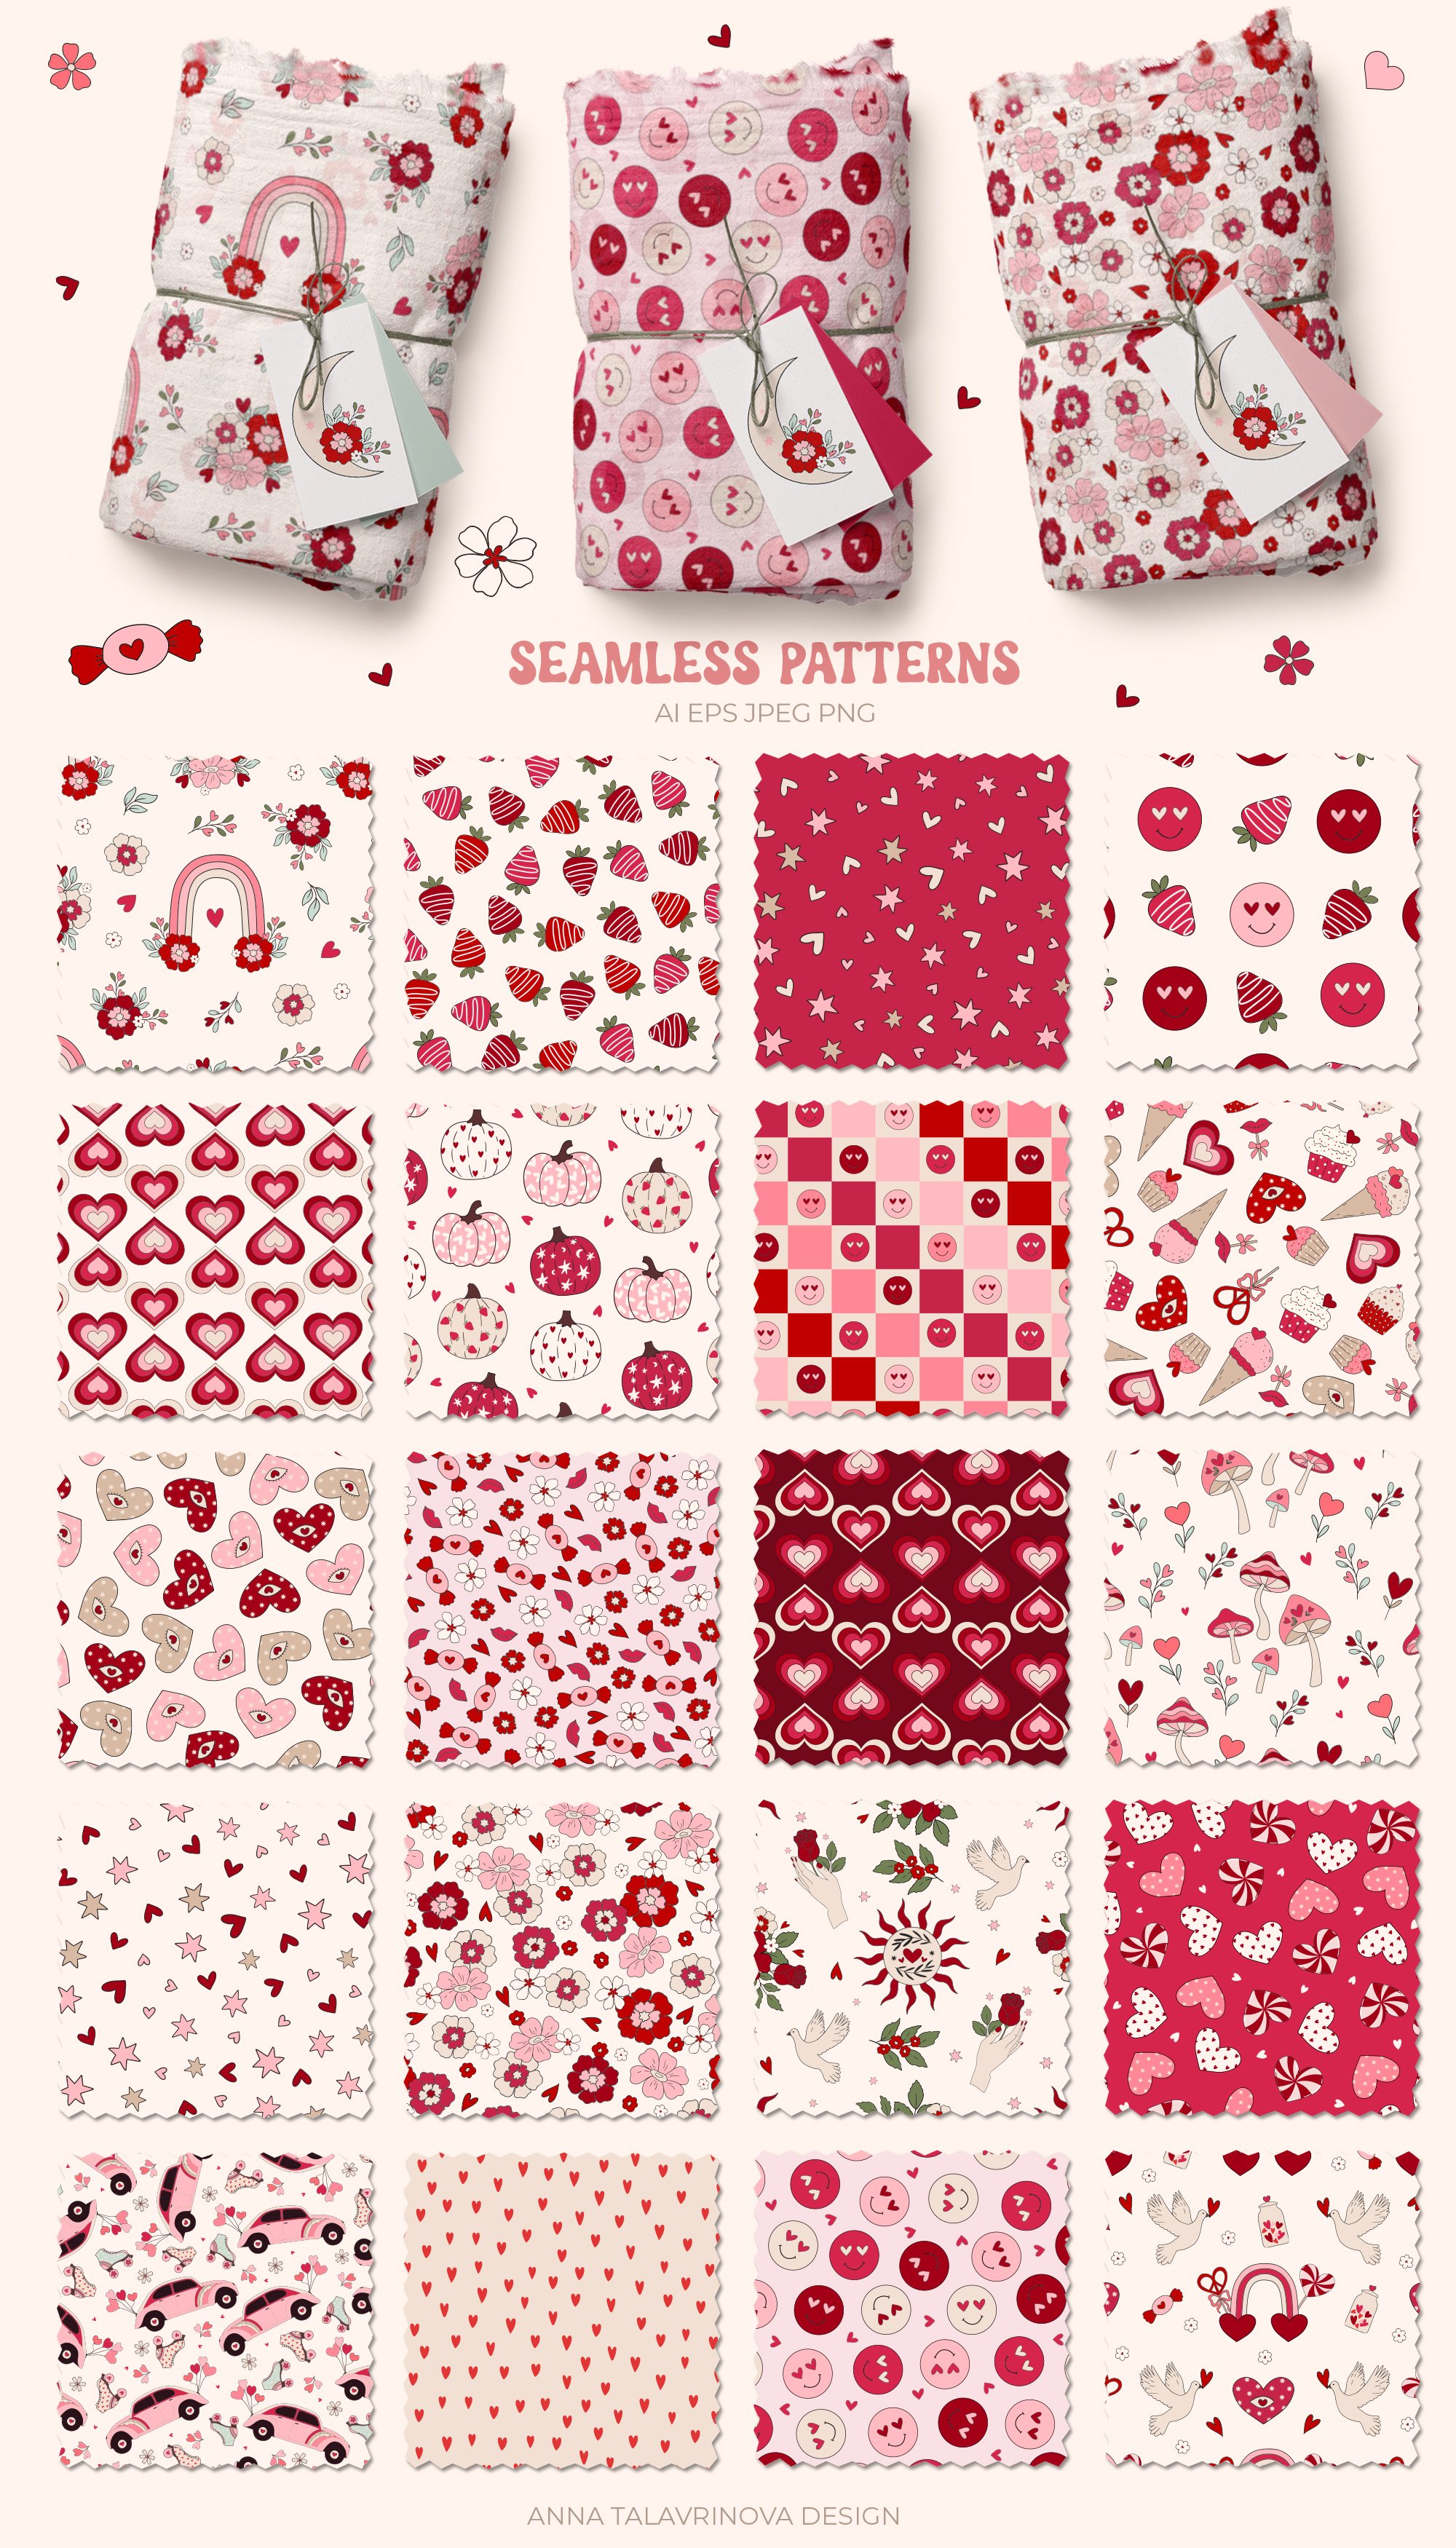 Patterns with flowers and hearts.